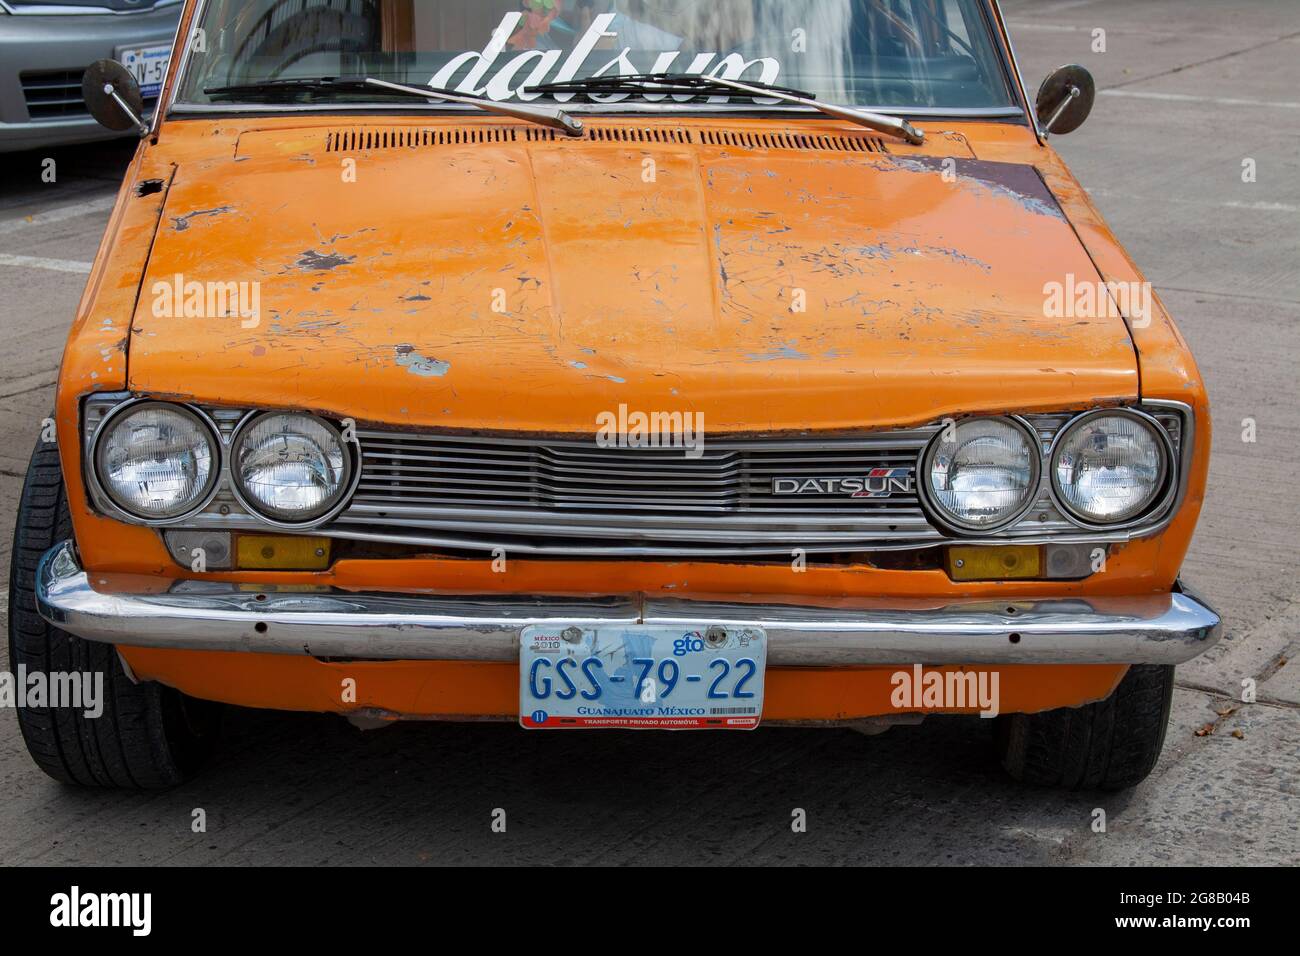 The front of a very old Datsun car still running in the streets of Mexico. Stock Photo